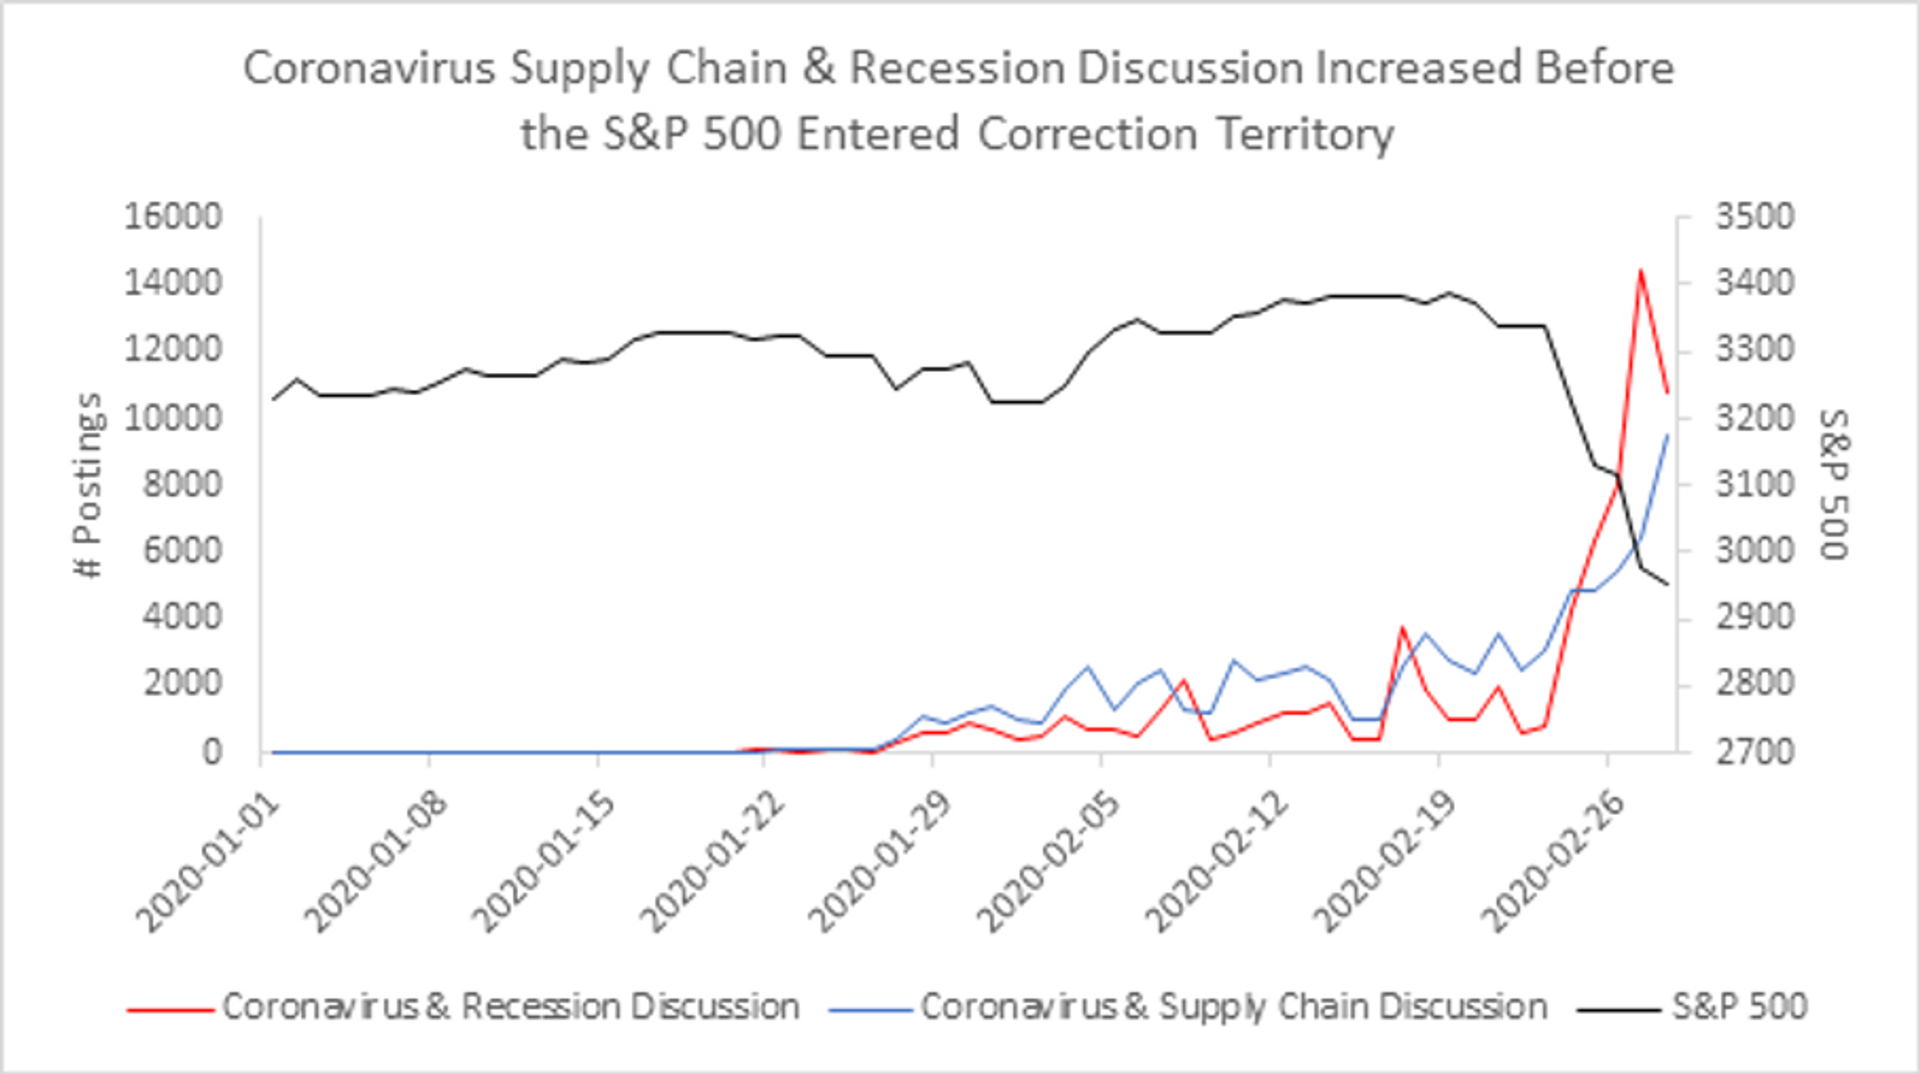 A chart showing that Coronavirus Supply Chain & Recession Discussion increased before the S&P 500 entered correction territory